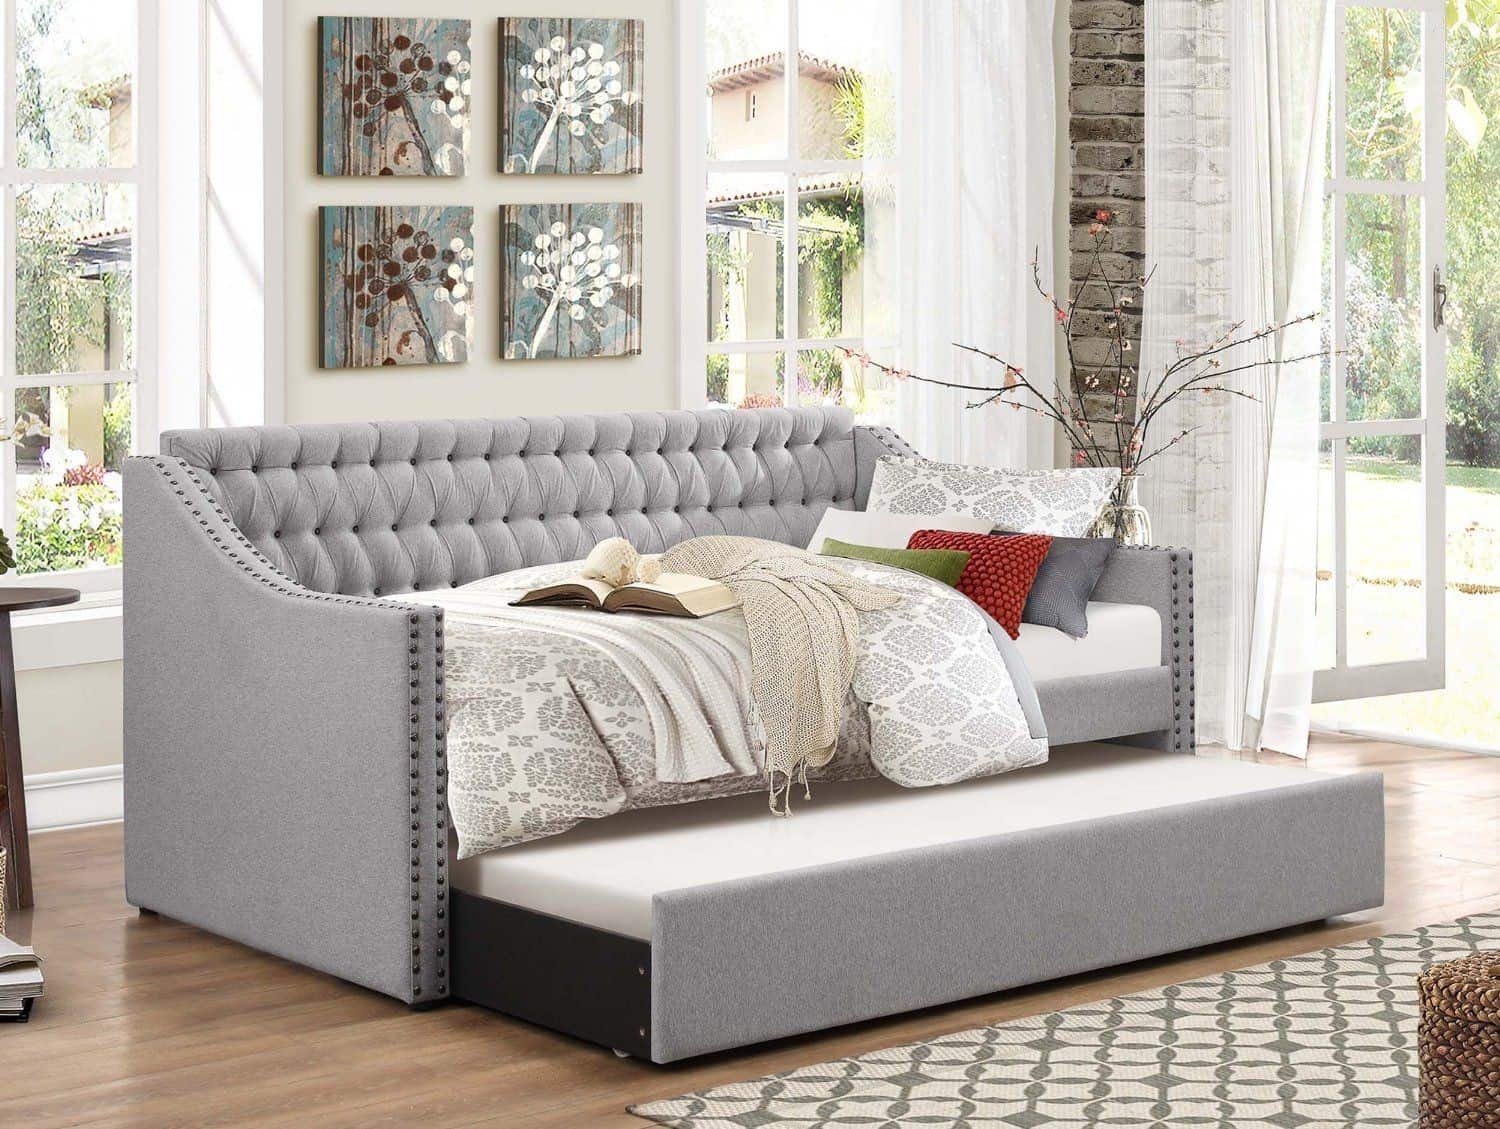 A Daybed with a Trundle